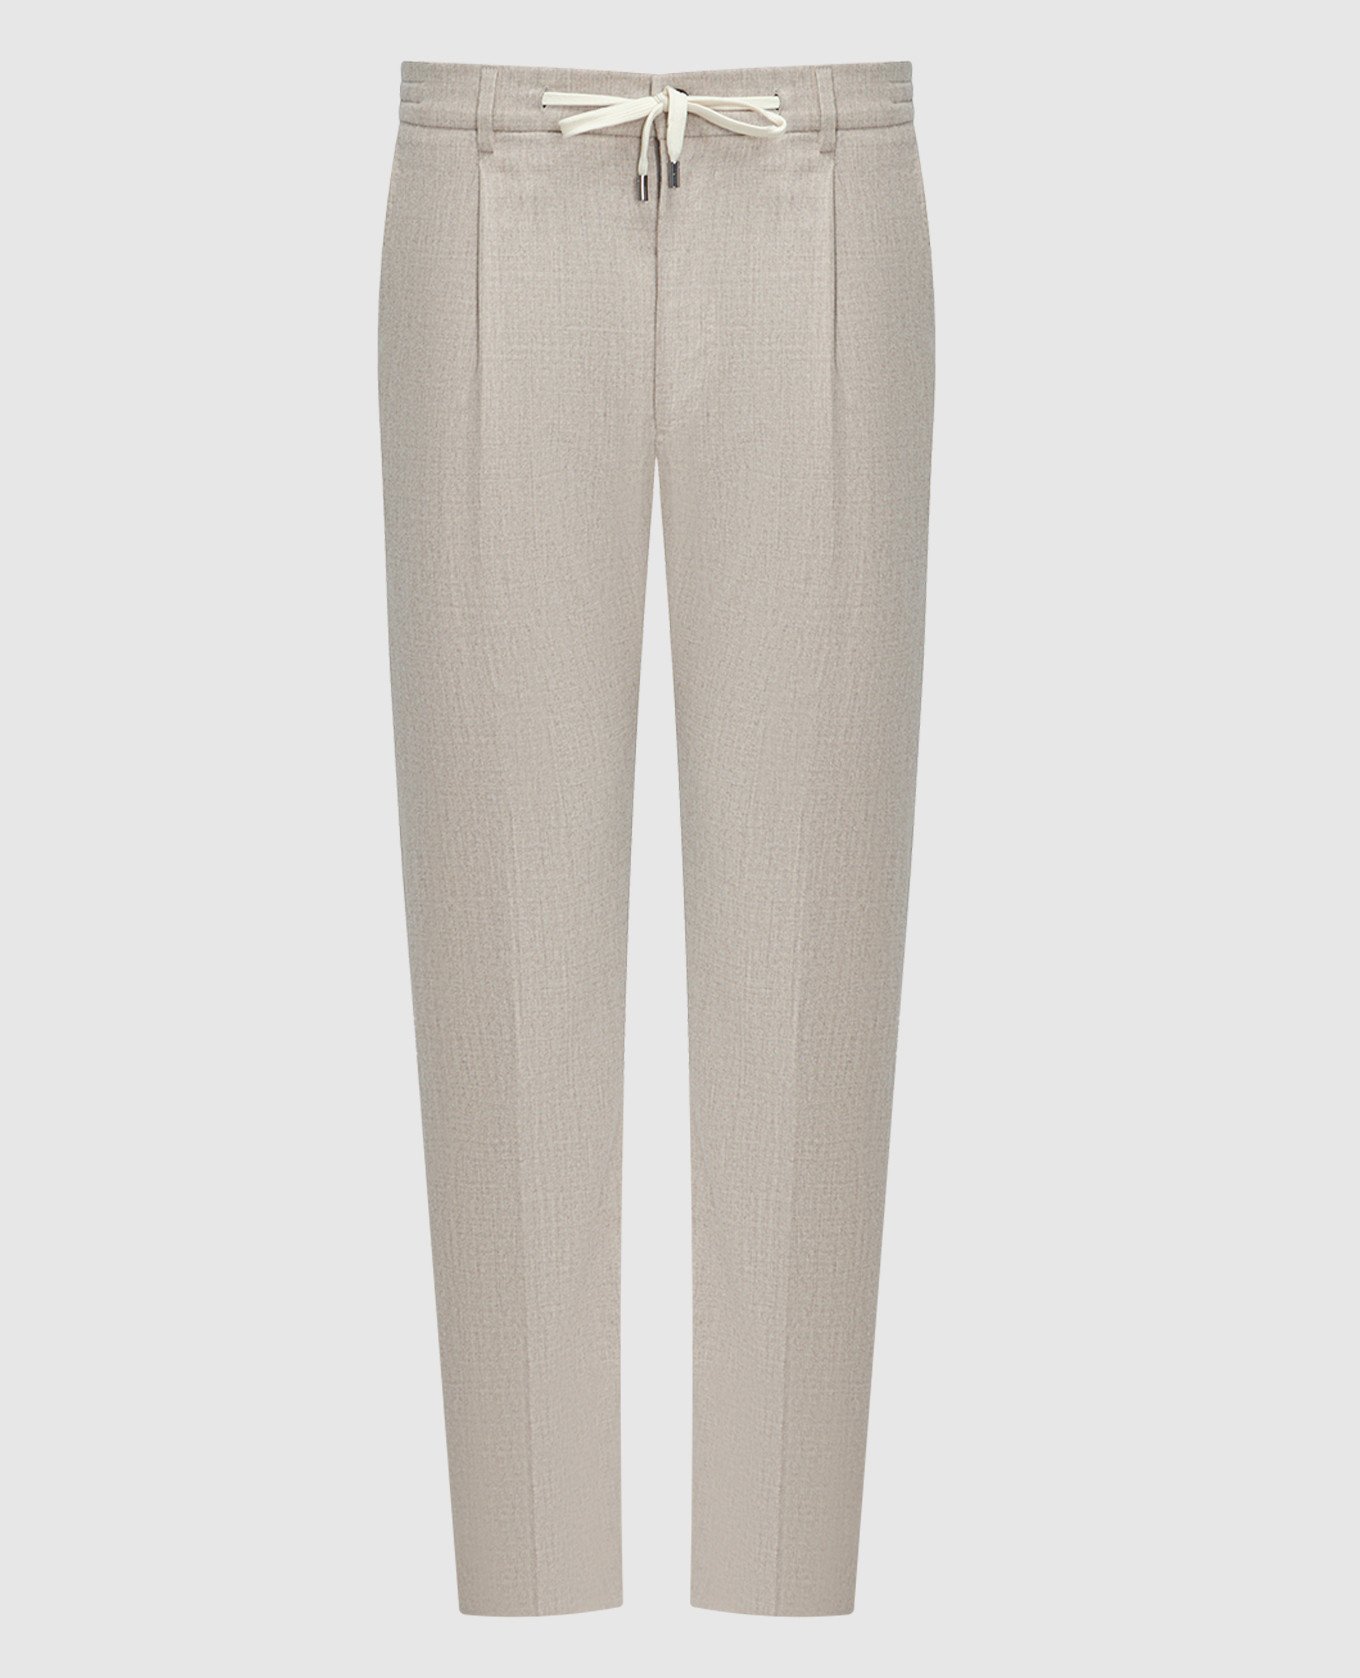 Anton-FSR beige wool and cashmere pants